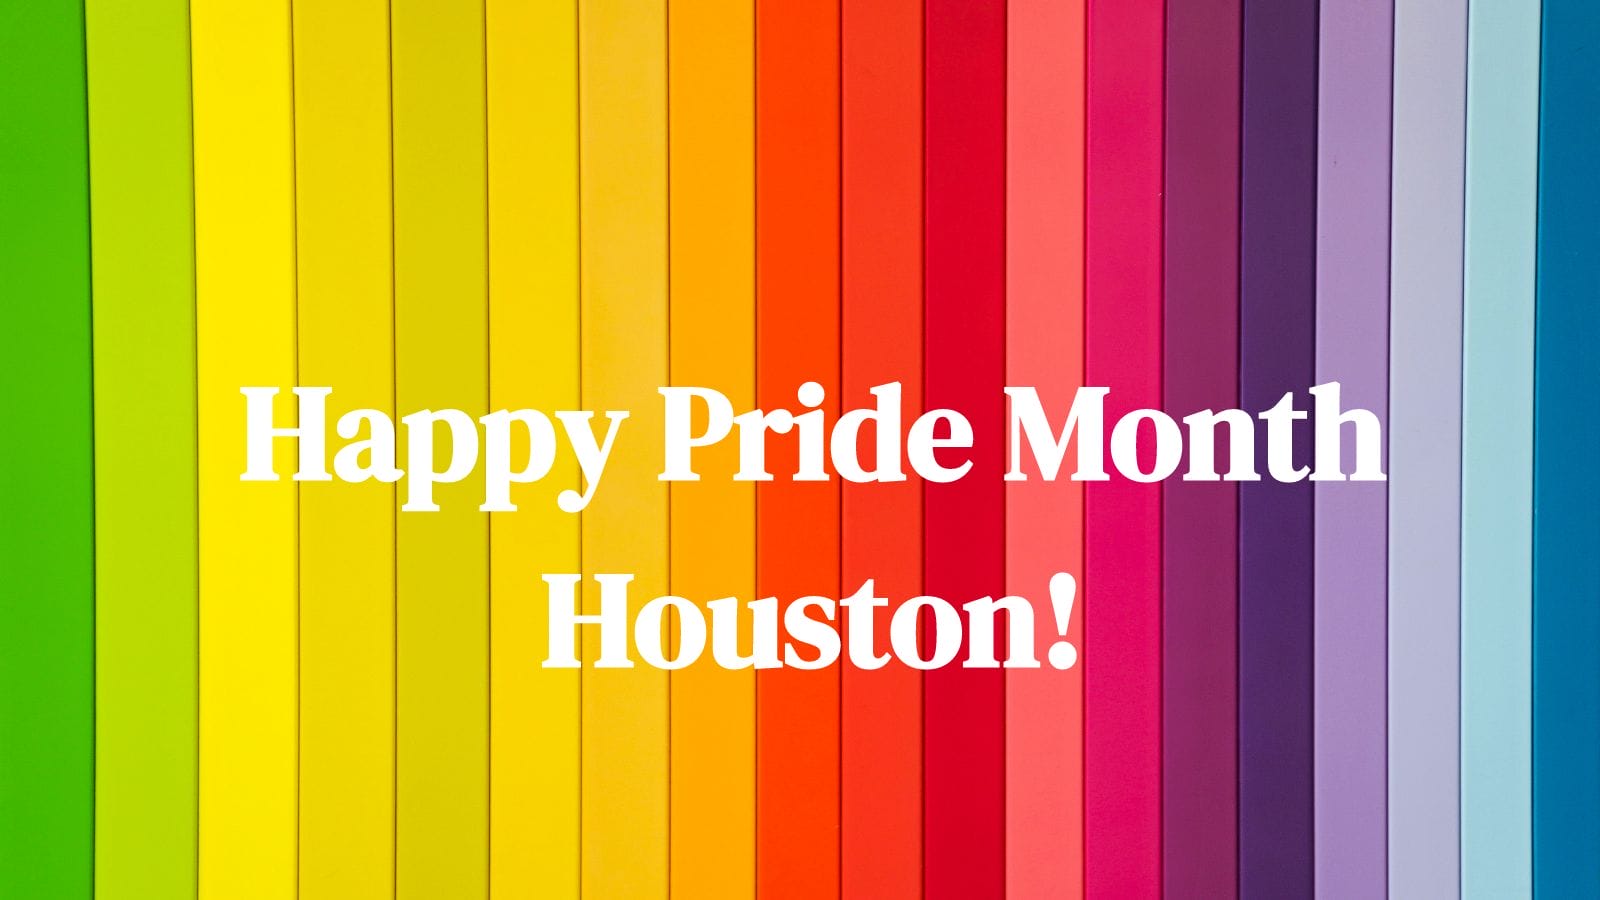 Pride Month Houston Picture this Post Celebrates with You